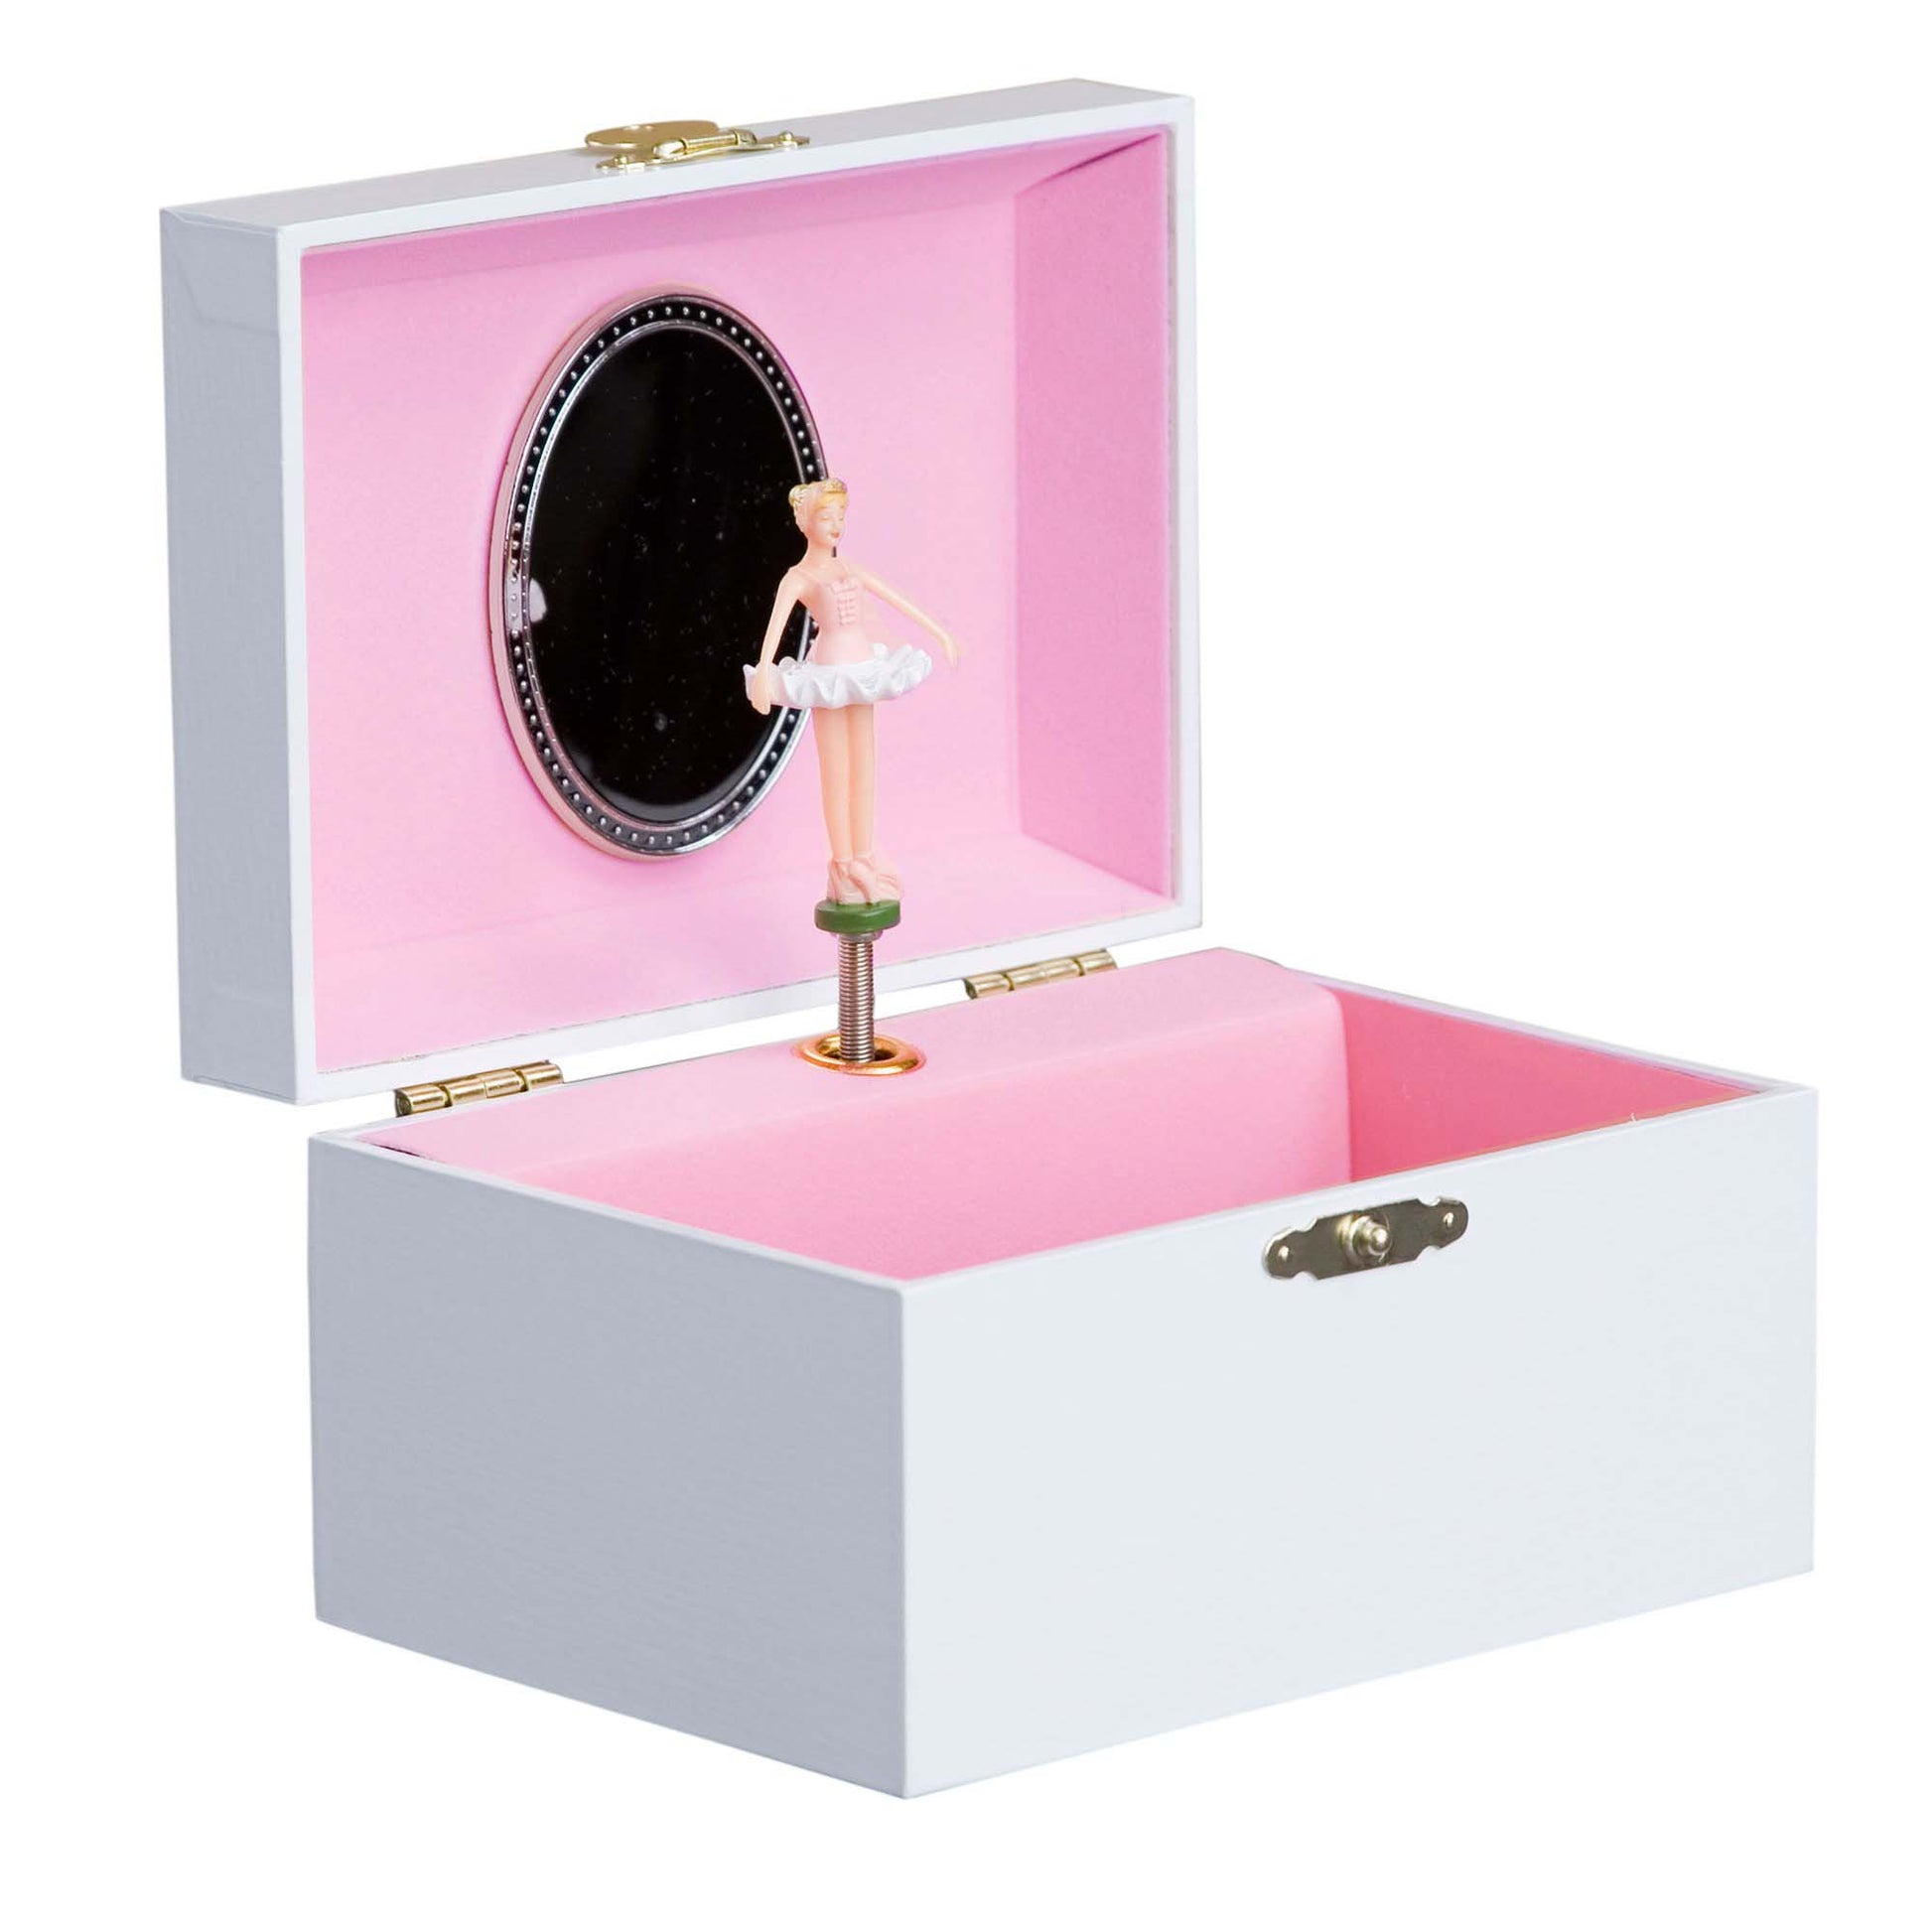 Personalized Ballerina Jewelry Box with Bunnies